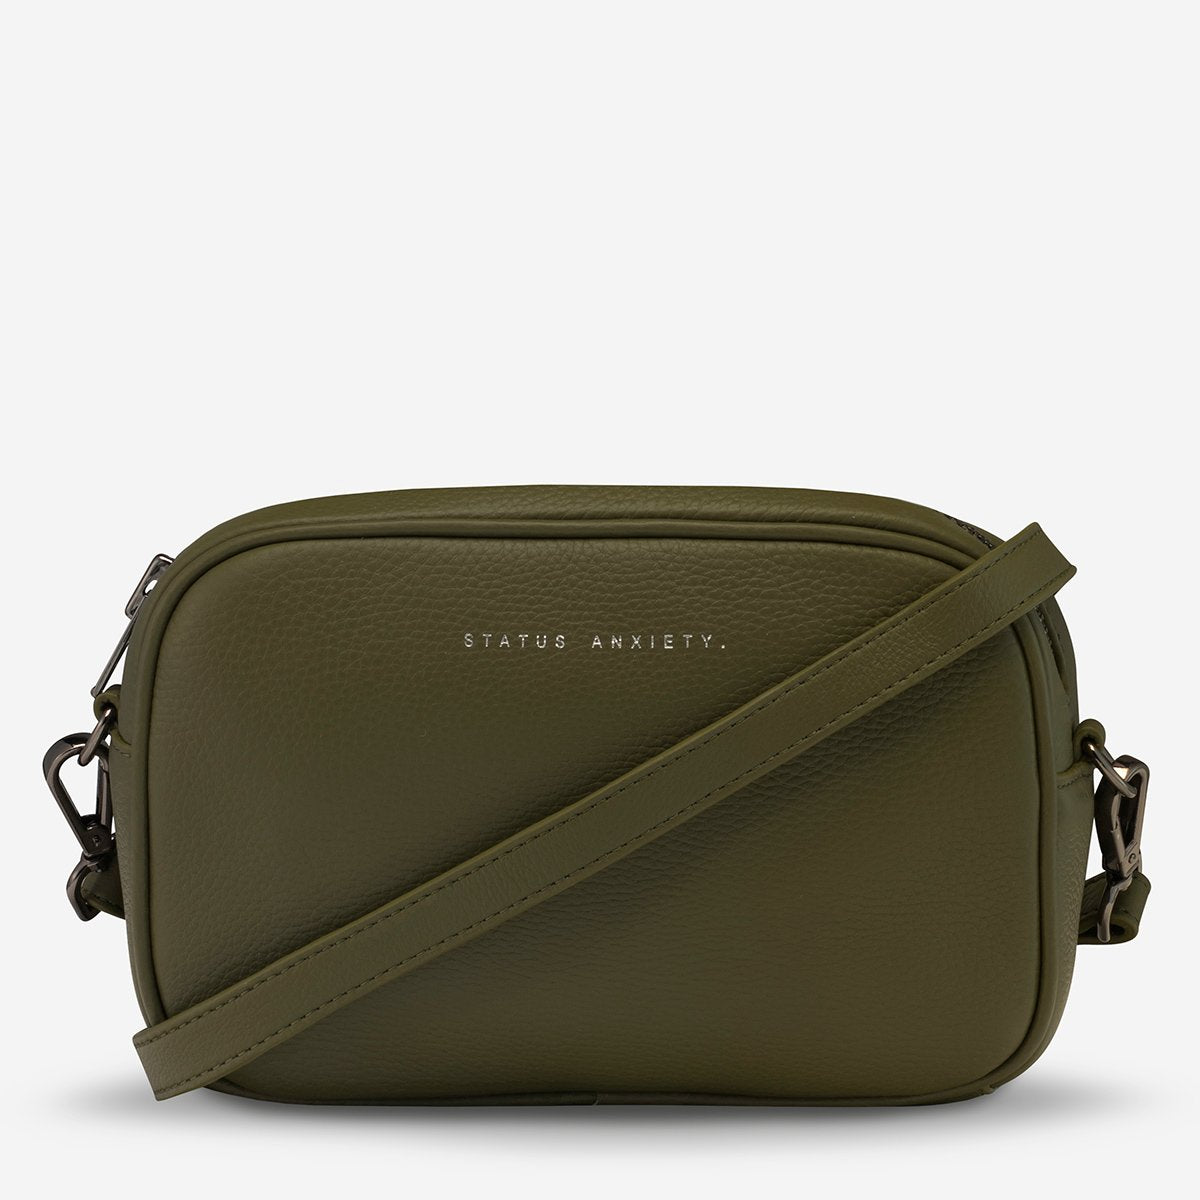 Status Anxiety Plunder Bag in Khaki with Strap Wrapped Around it